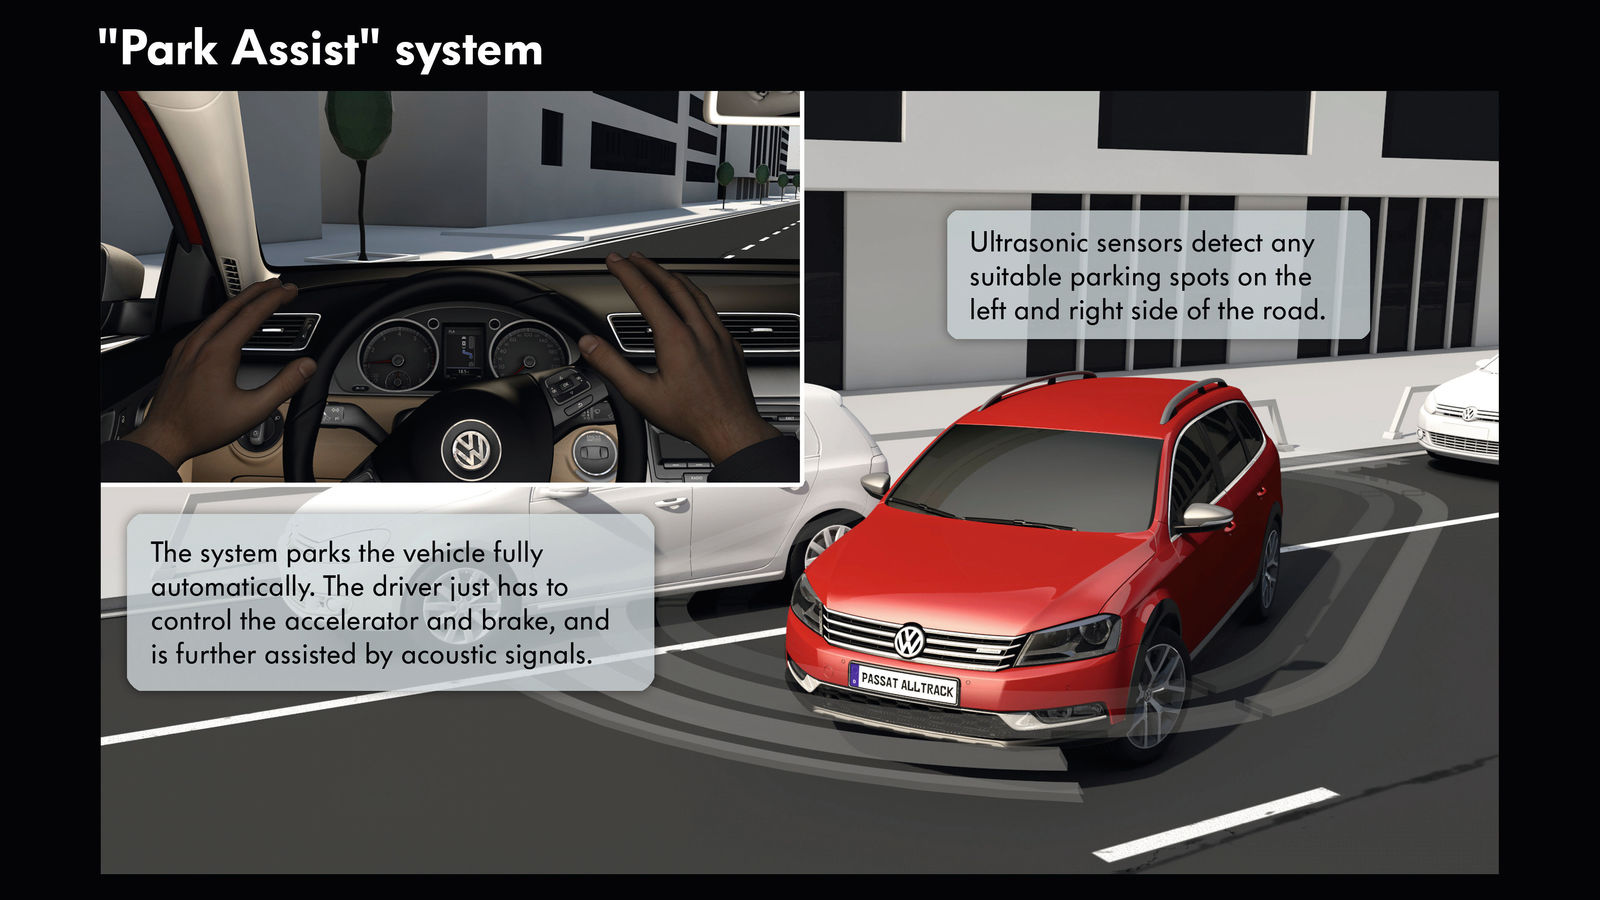 The systems parks the vehicle fully automatically. The driver just has to control the accelerator and brake, and is further assisted by acoustic signals. Ultrasonic sensors detect any suitable parking spots on the left and right side of the road.